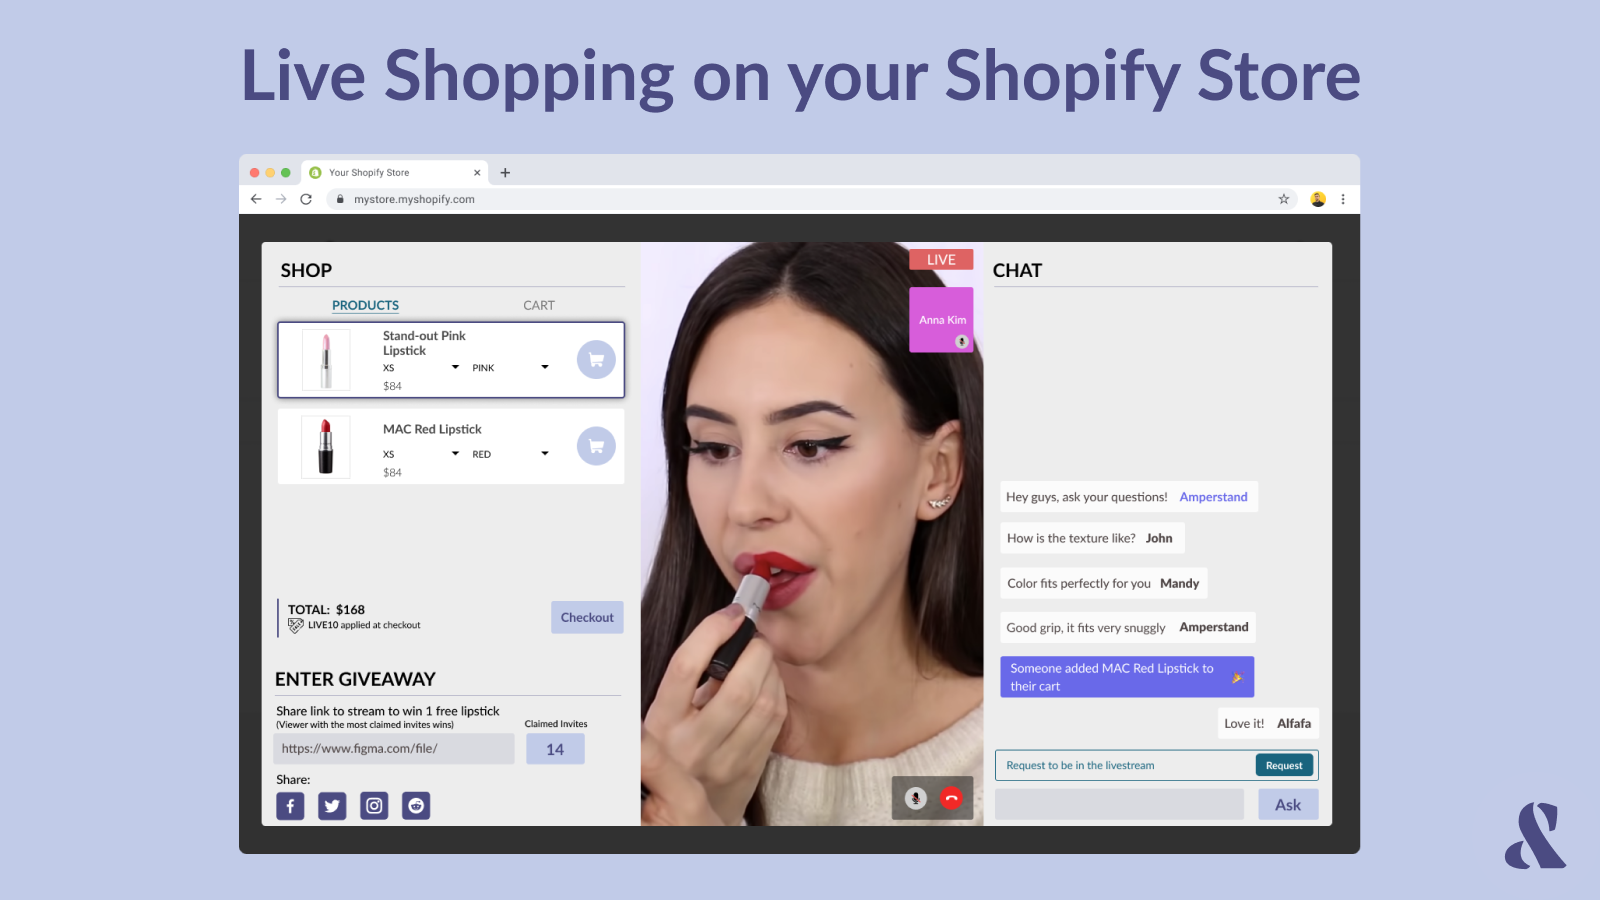 Live shopping on your Shopify store